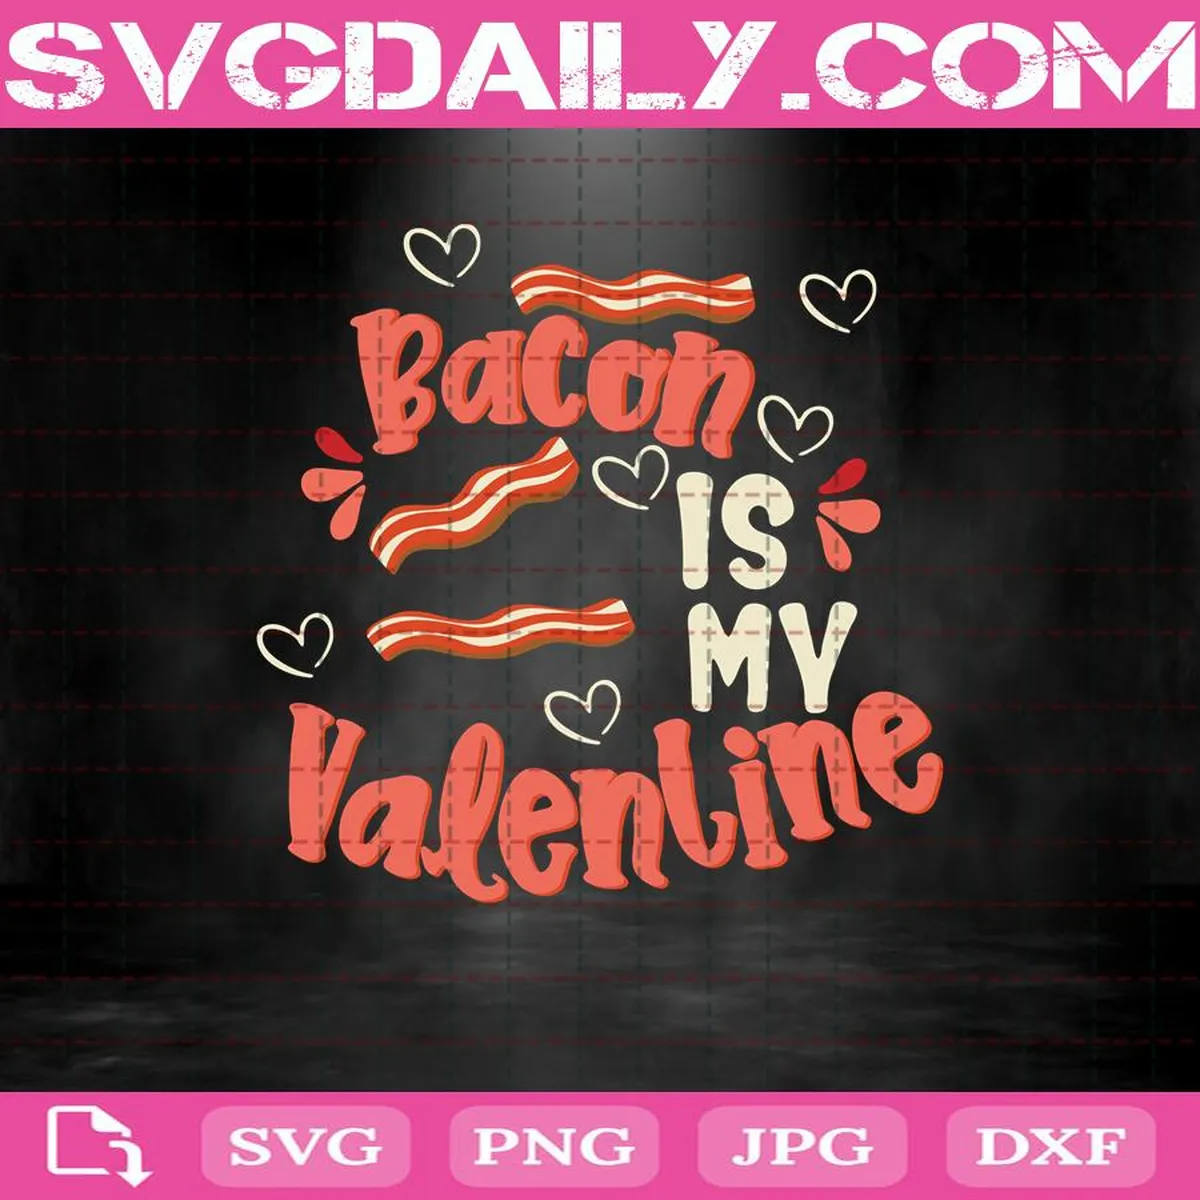 This Bacon Is My Valentine Hearts Bacon Lovers Svg, Valentine’s Day Svg, Bacon Lovers Svg, Svg Png Dxf Eps AI Instant Download